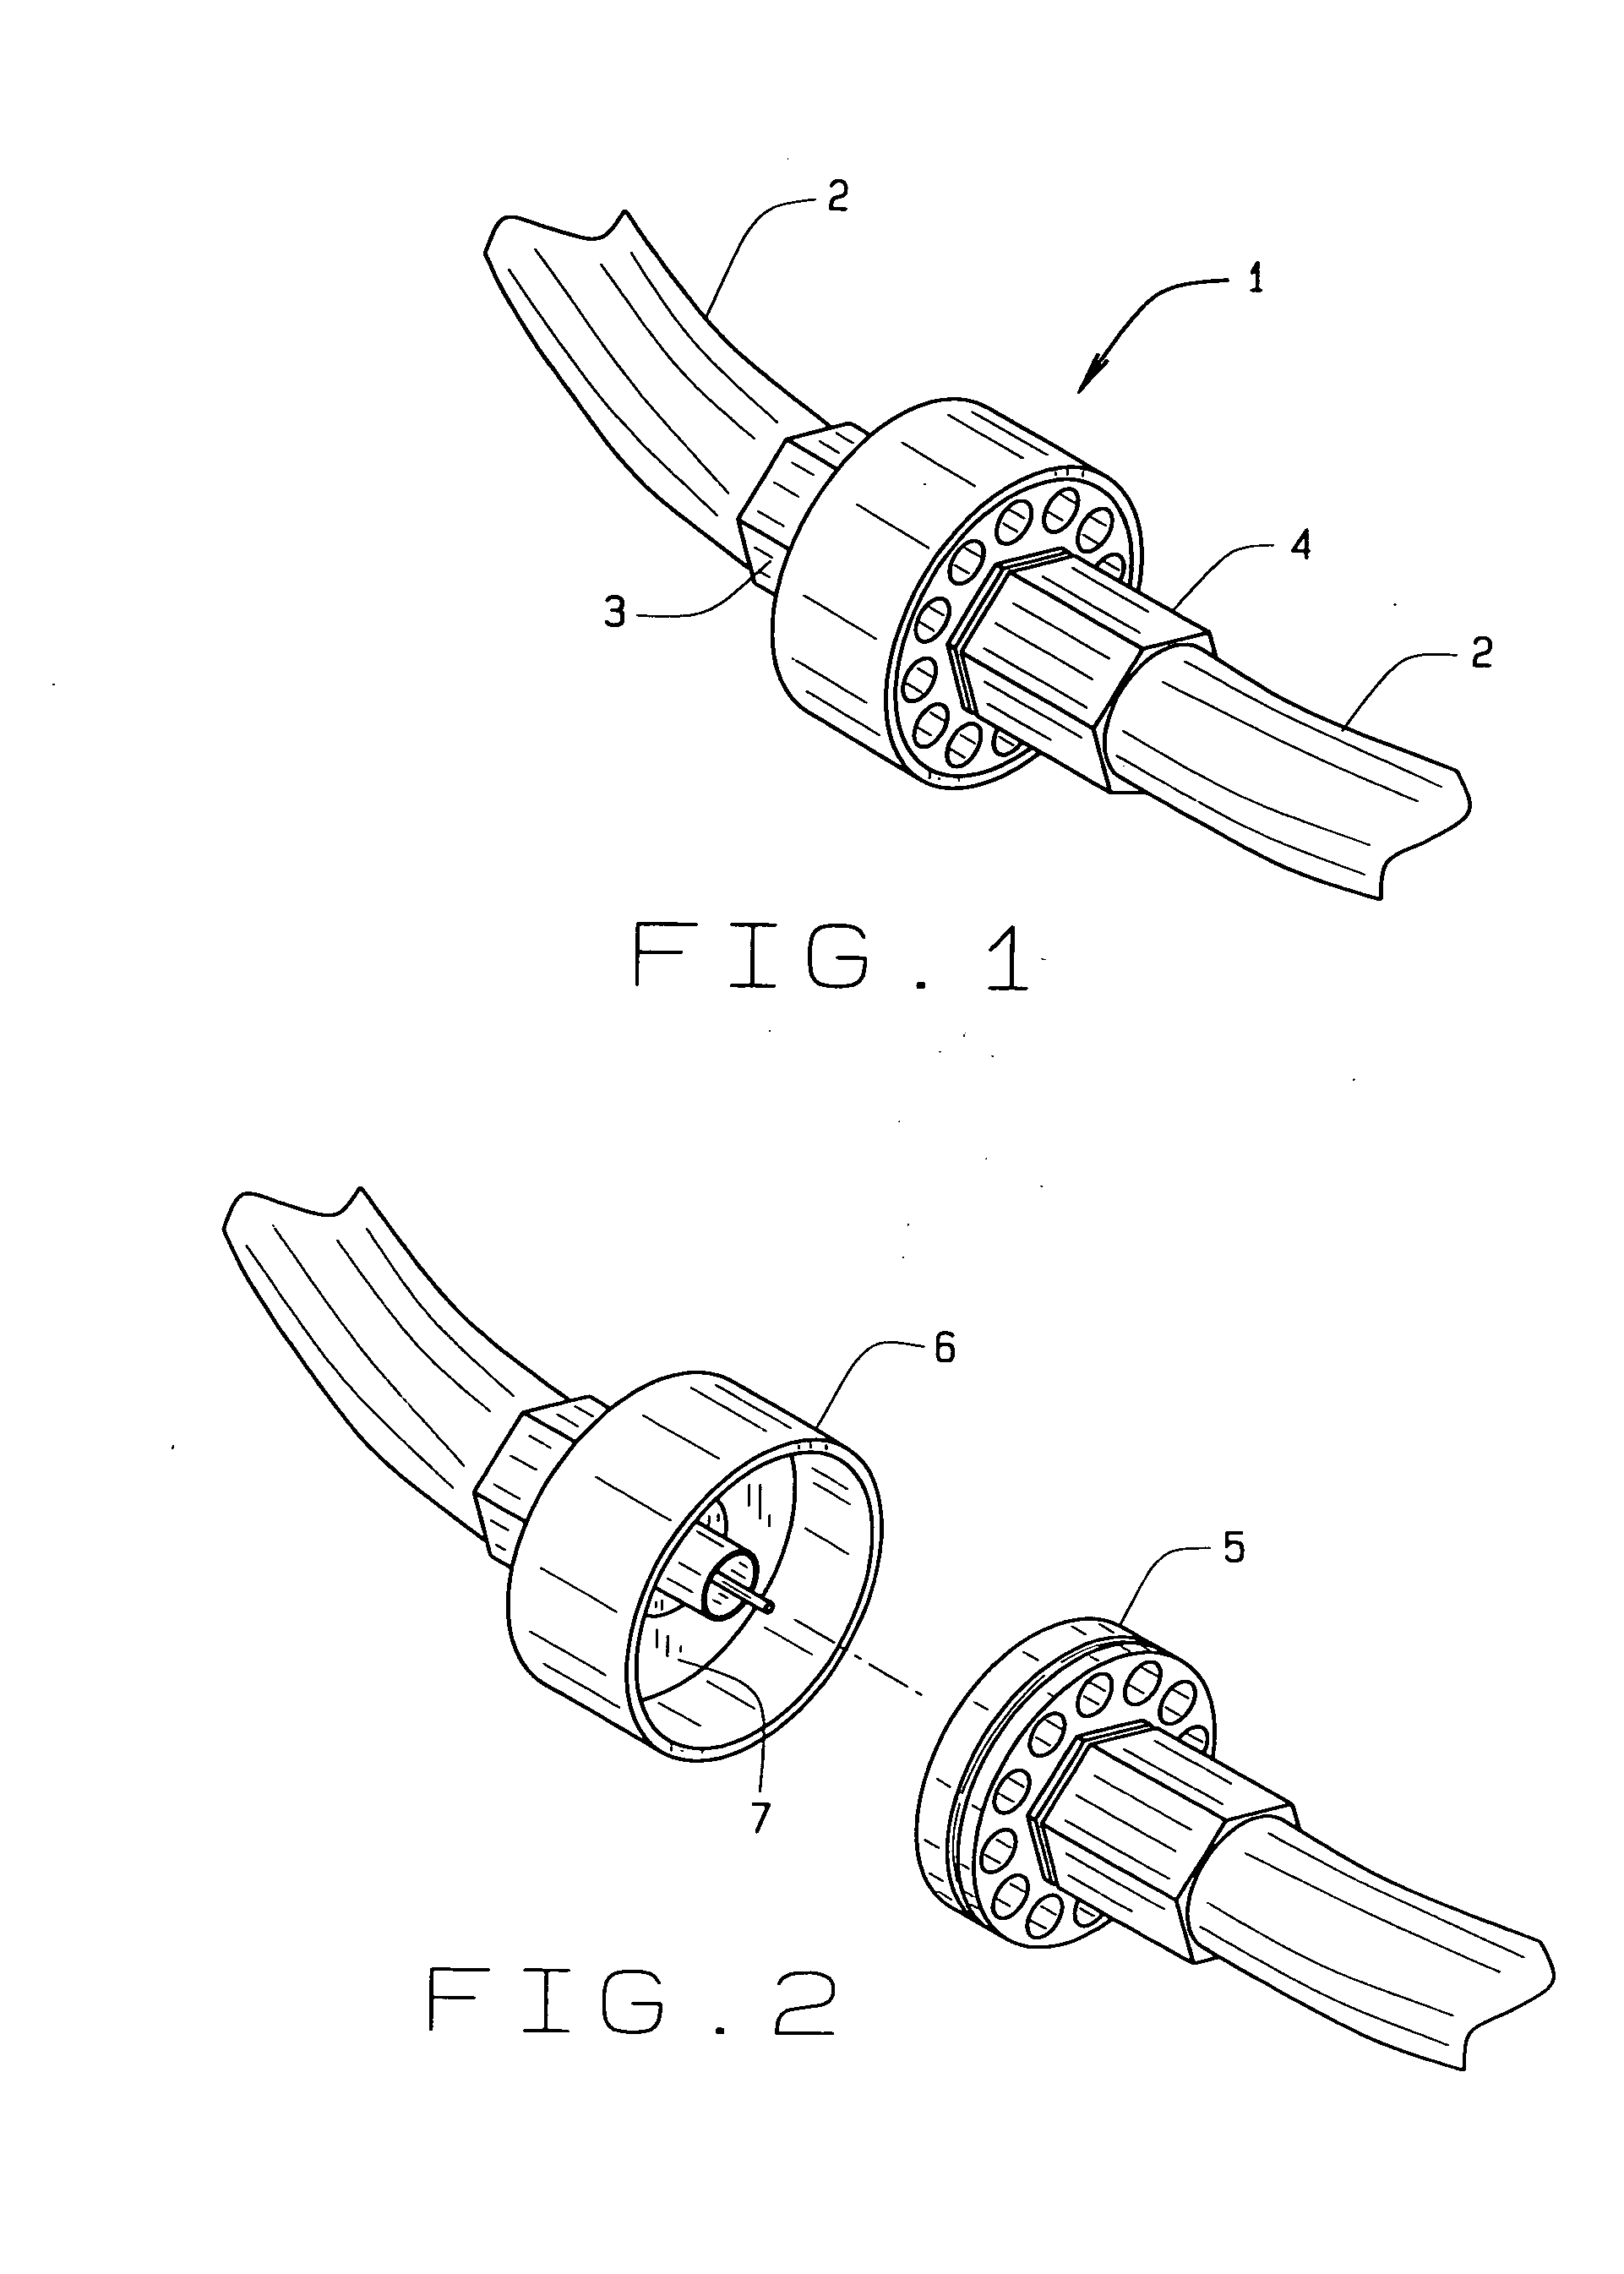 Fuel line breakaway connector secured by plurality of individually spaced magnets